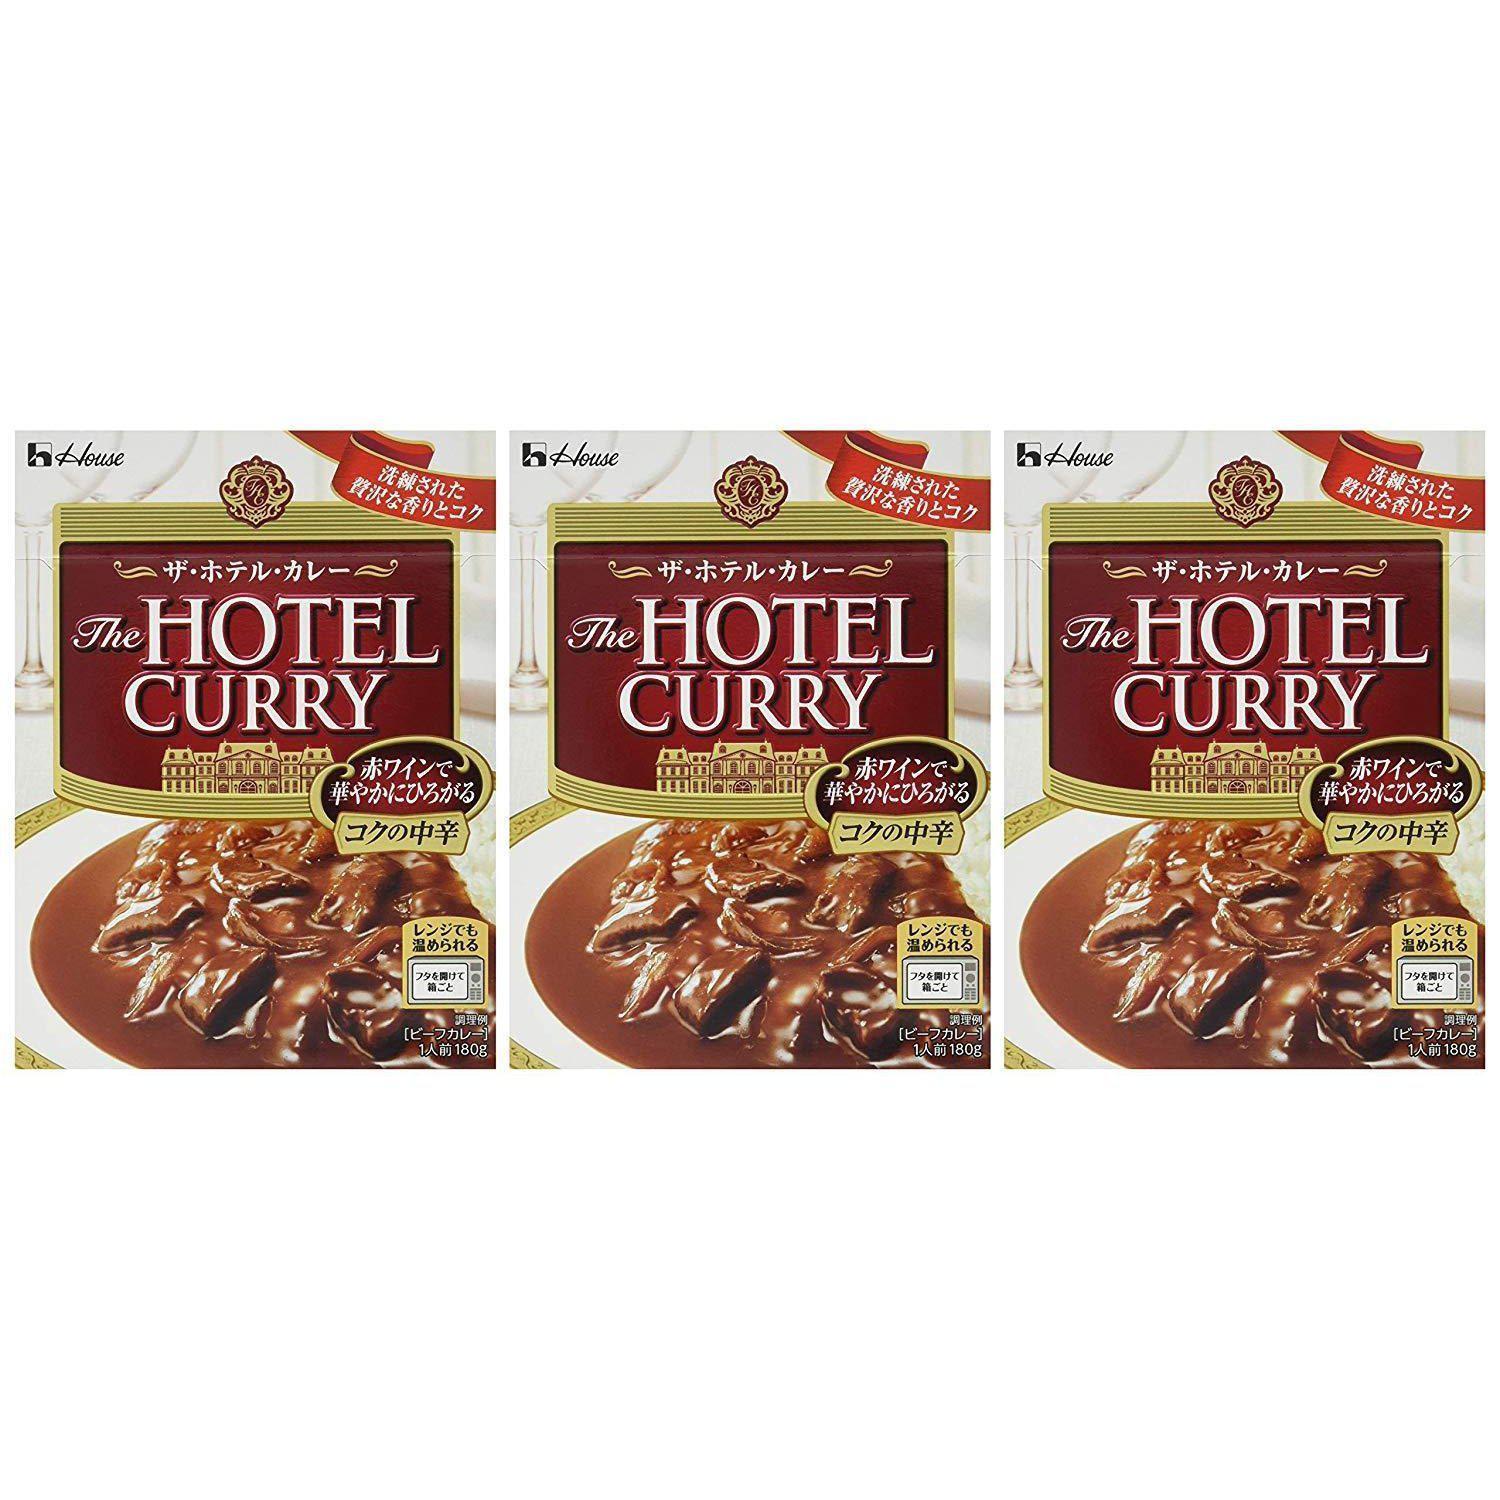 –　Japanese　Rich　180g　Sauce　Hotel　Curry　Packs　The　x　Type　House　Taste